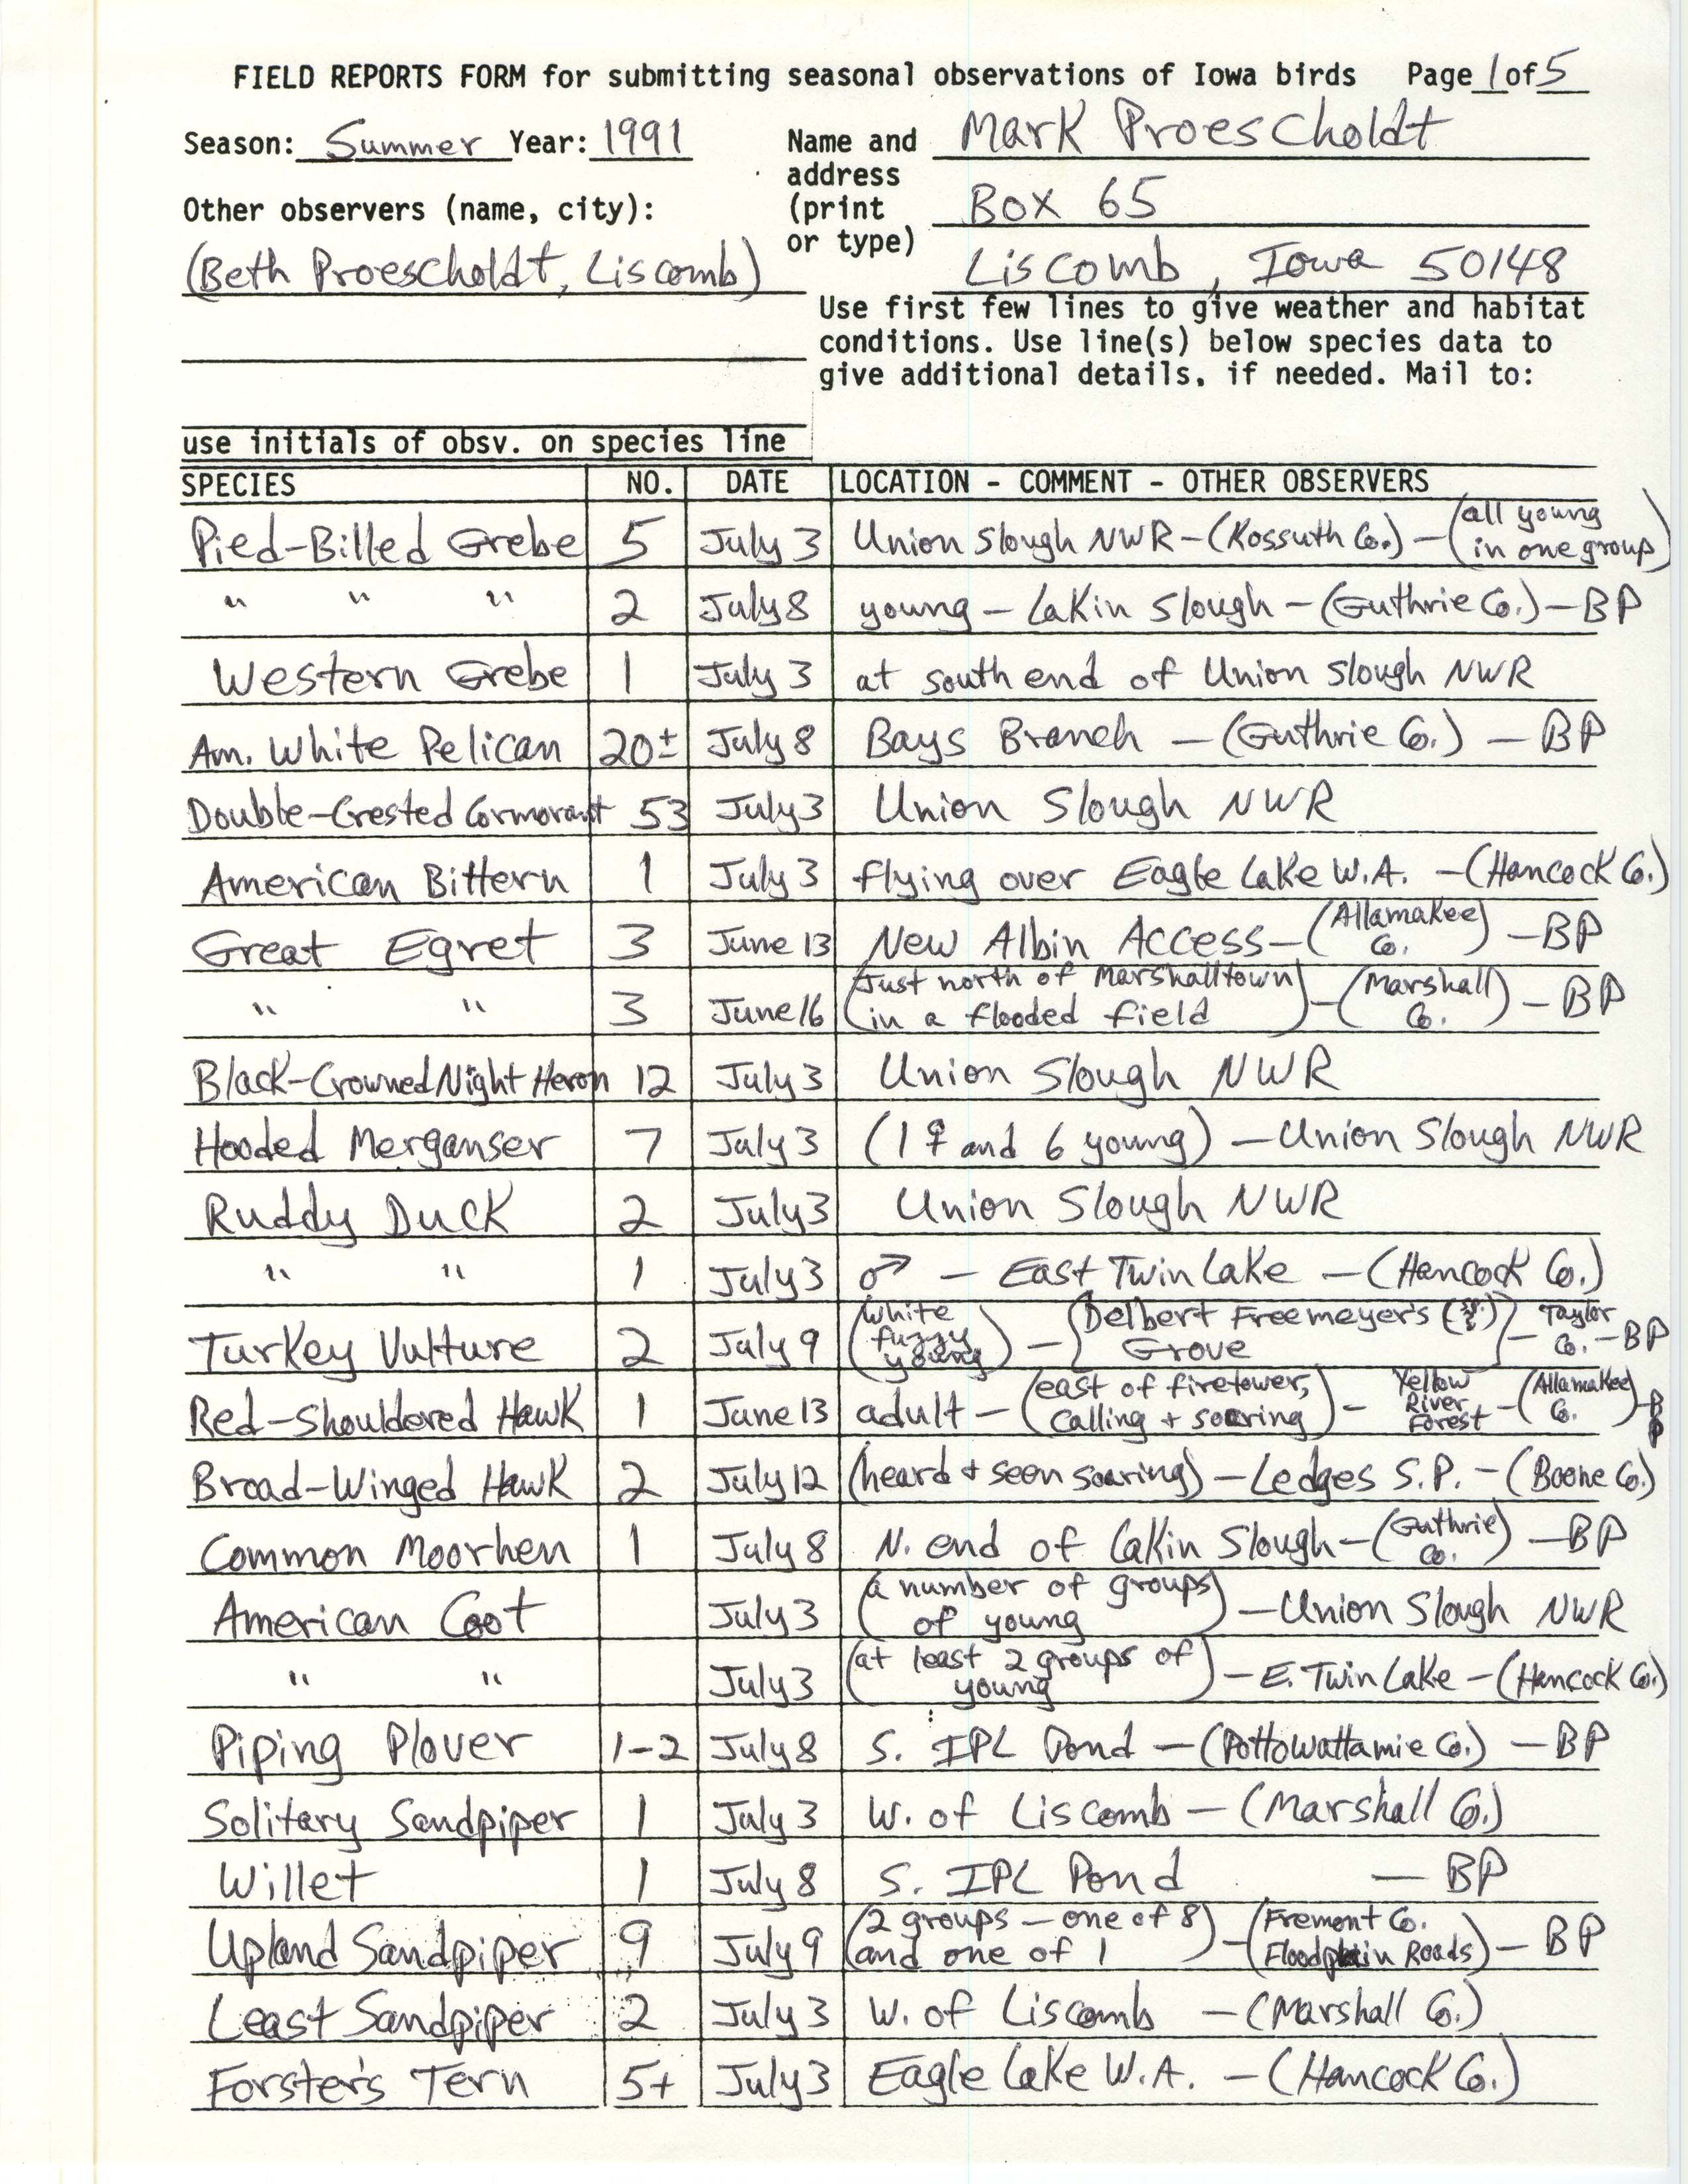 Field reports form for submitting seasonal observations of Iowa birds, Mark Proescholdt, summer 1991